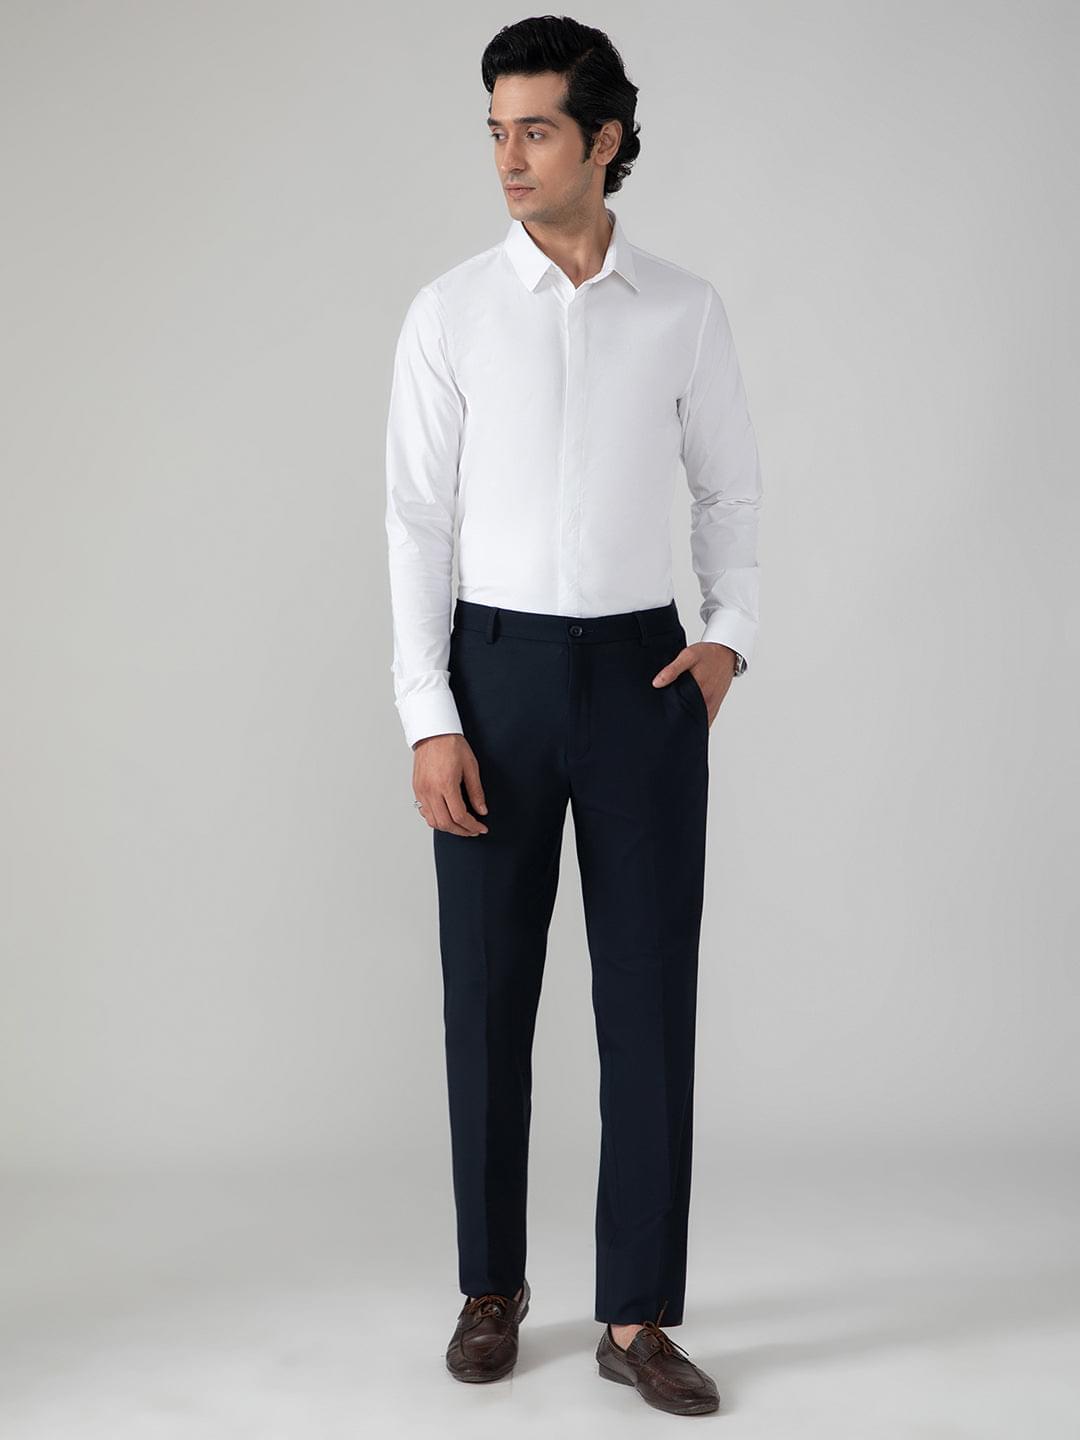 Satin Evening Shirt in White with Stretch - Slim Fit